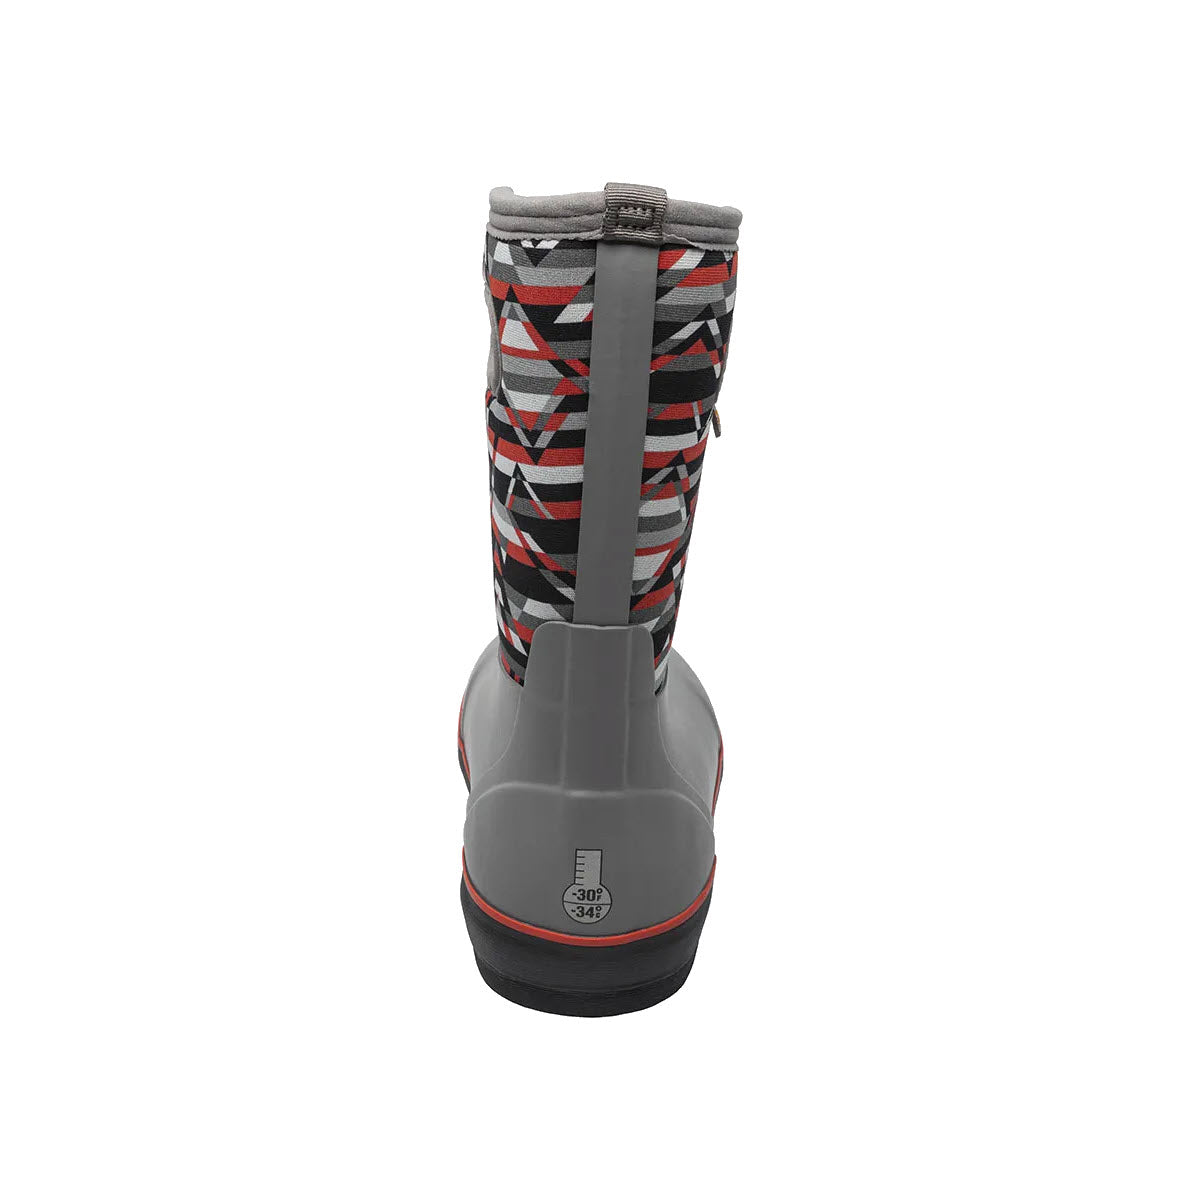 Back view of a gray rubber boot with red, black, and white zigzag patterned laces, featuring a red stripe on the sole and a logo on the heel. This Bogs Kids Classic II Mountain Geo Gray Multi - Kids.